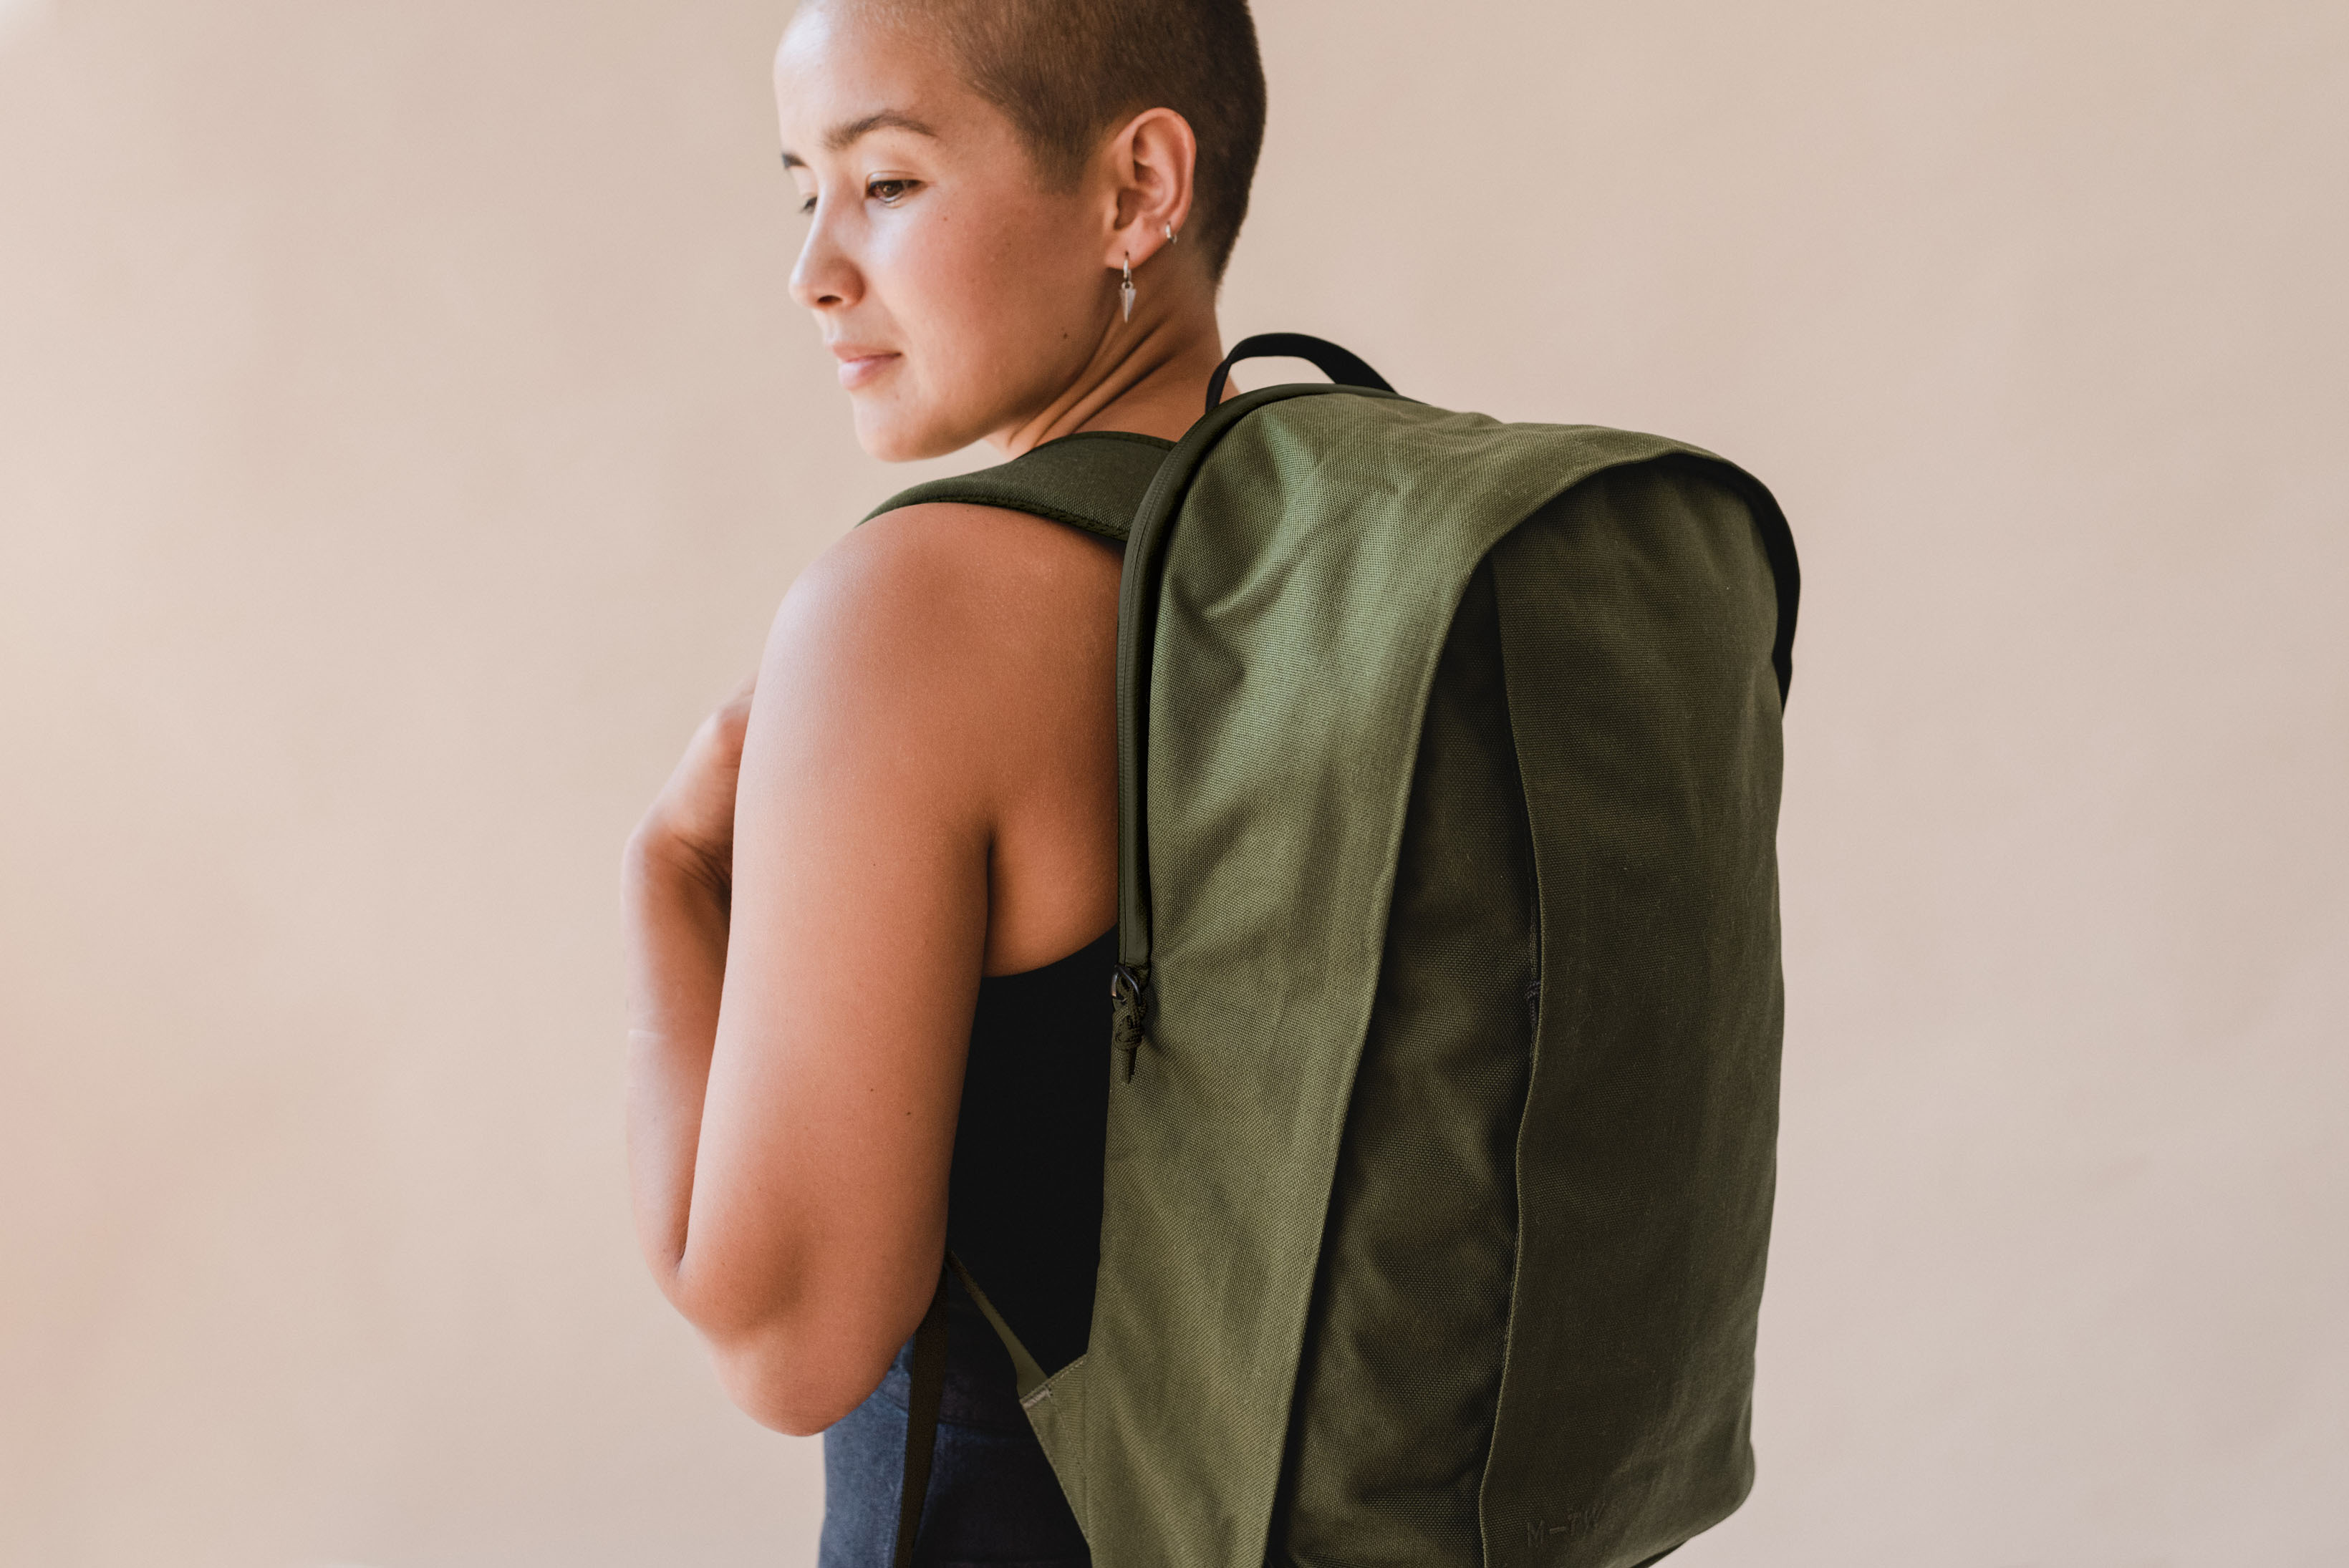 The Daily Lightweight Pack | Moment Everyday Bag 17L Review